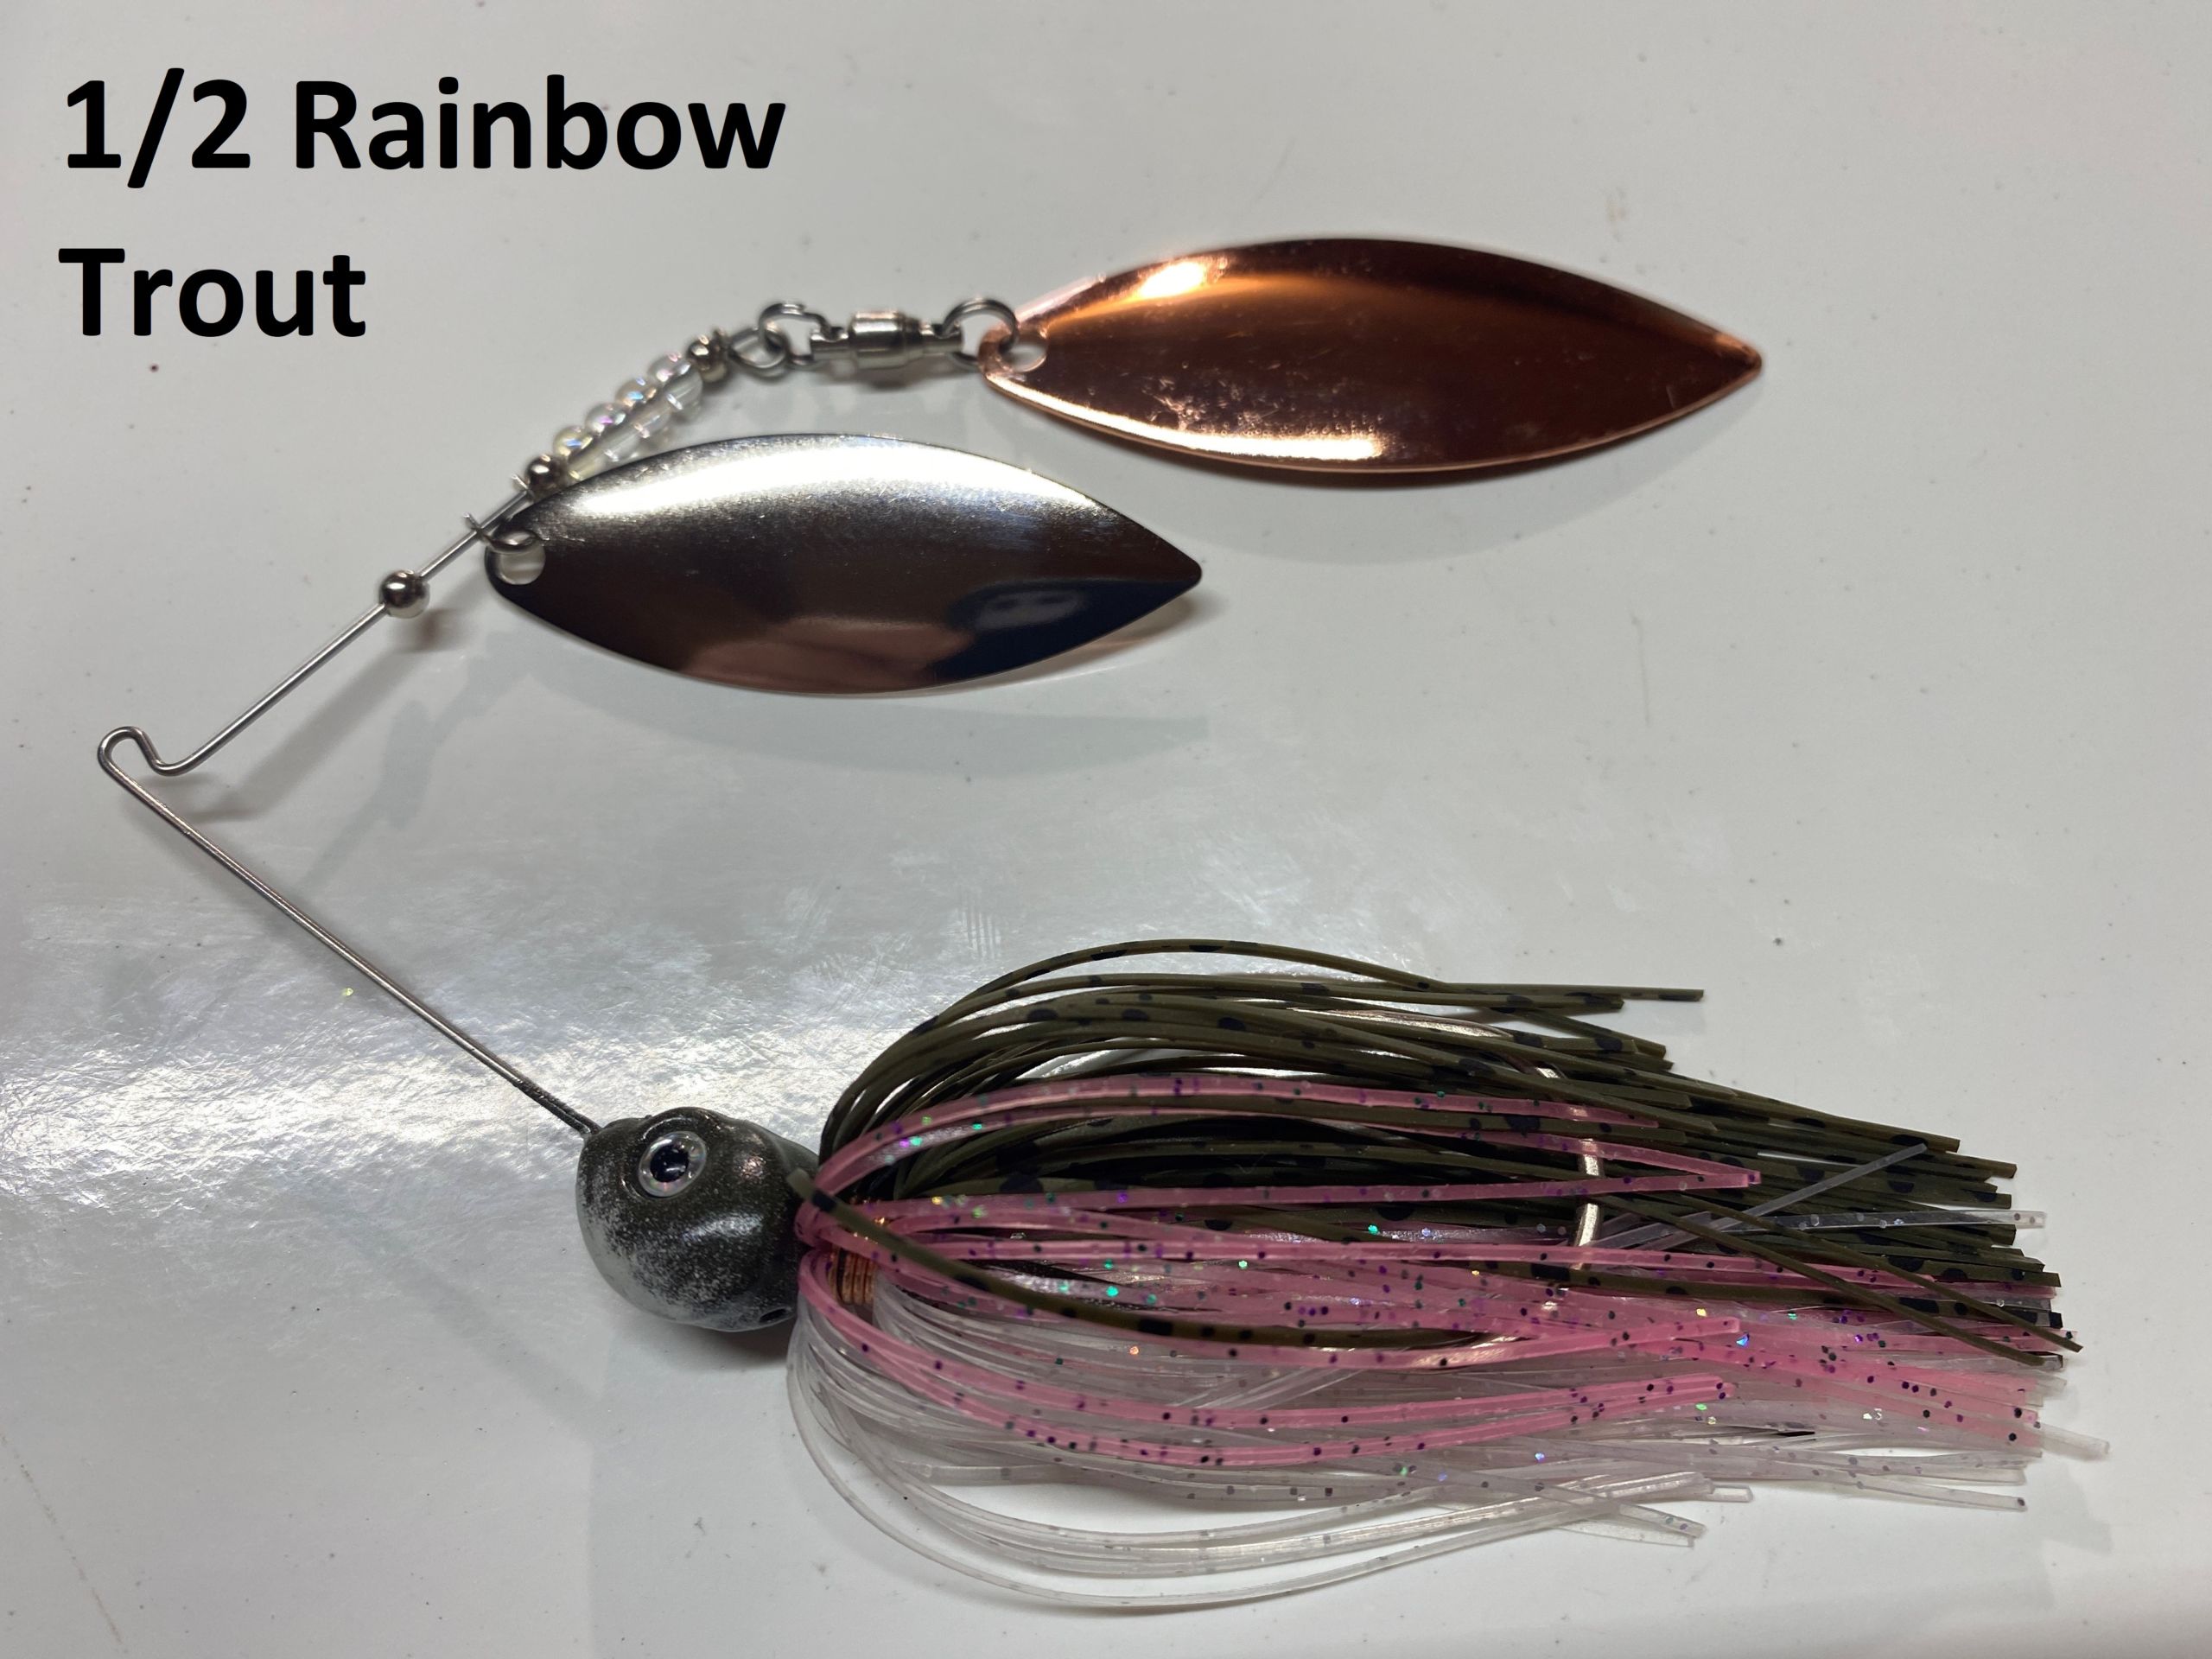 1/2 Rainbow Trout – Adrenaline Tackle Company 217-502-6880